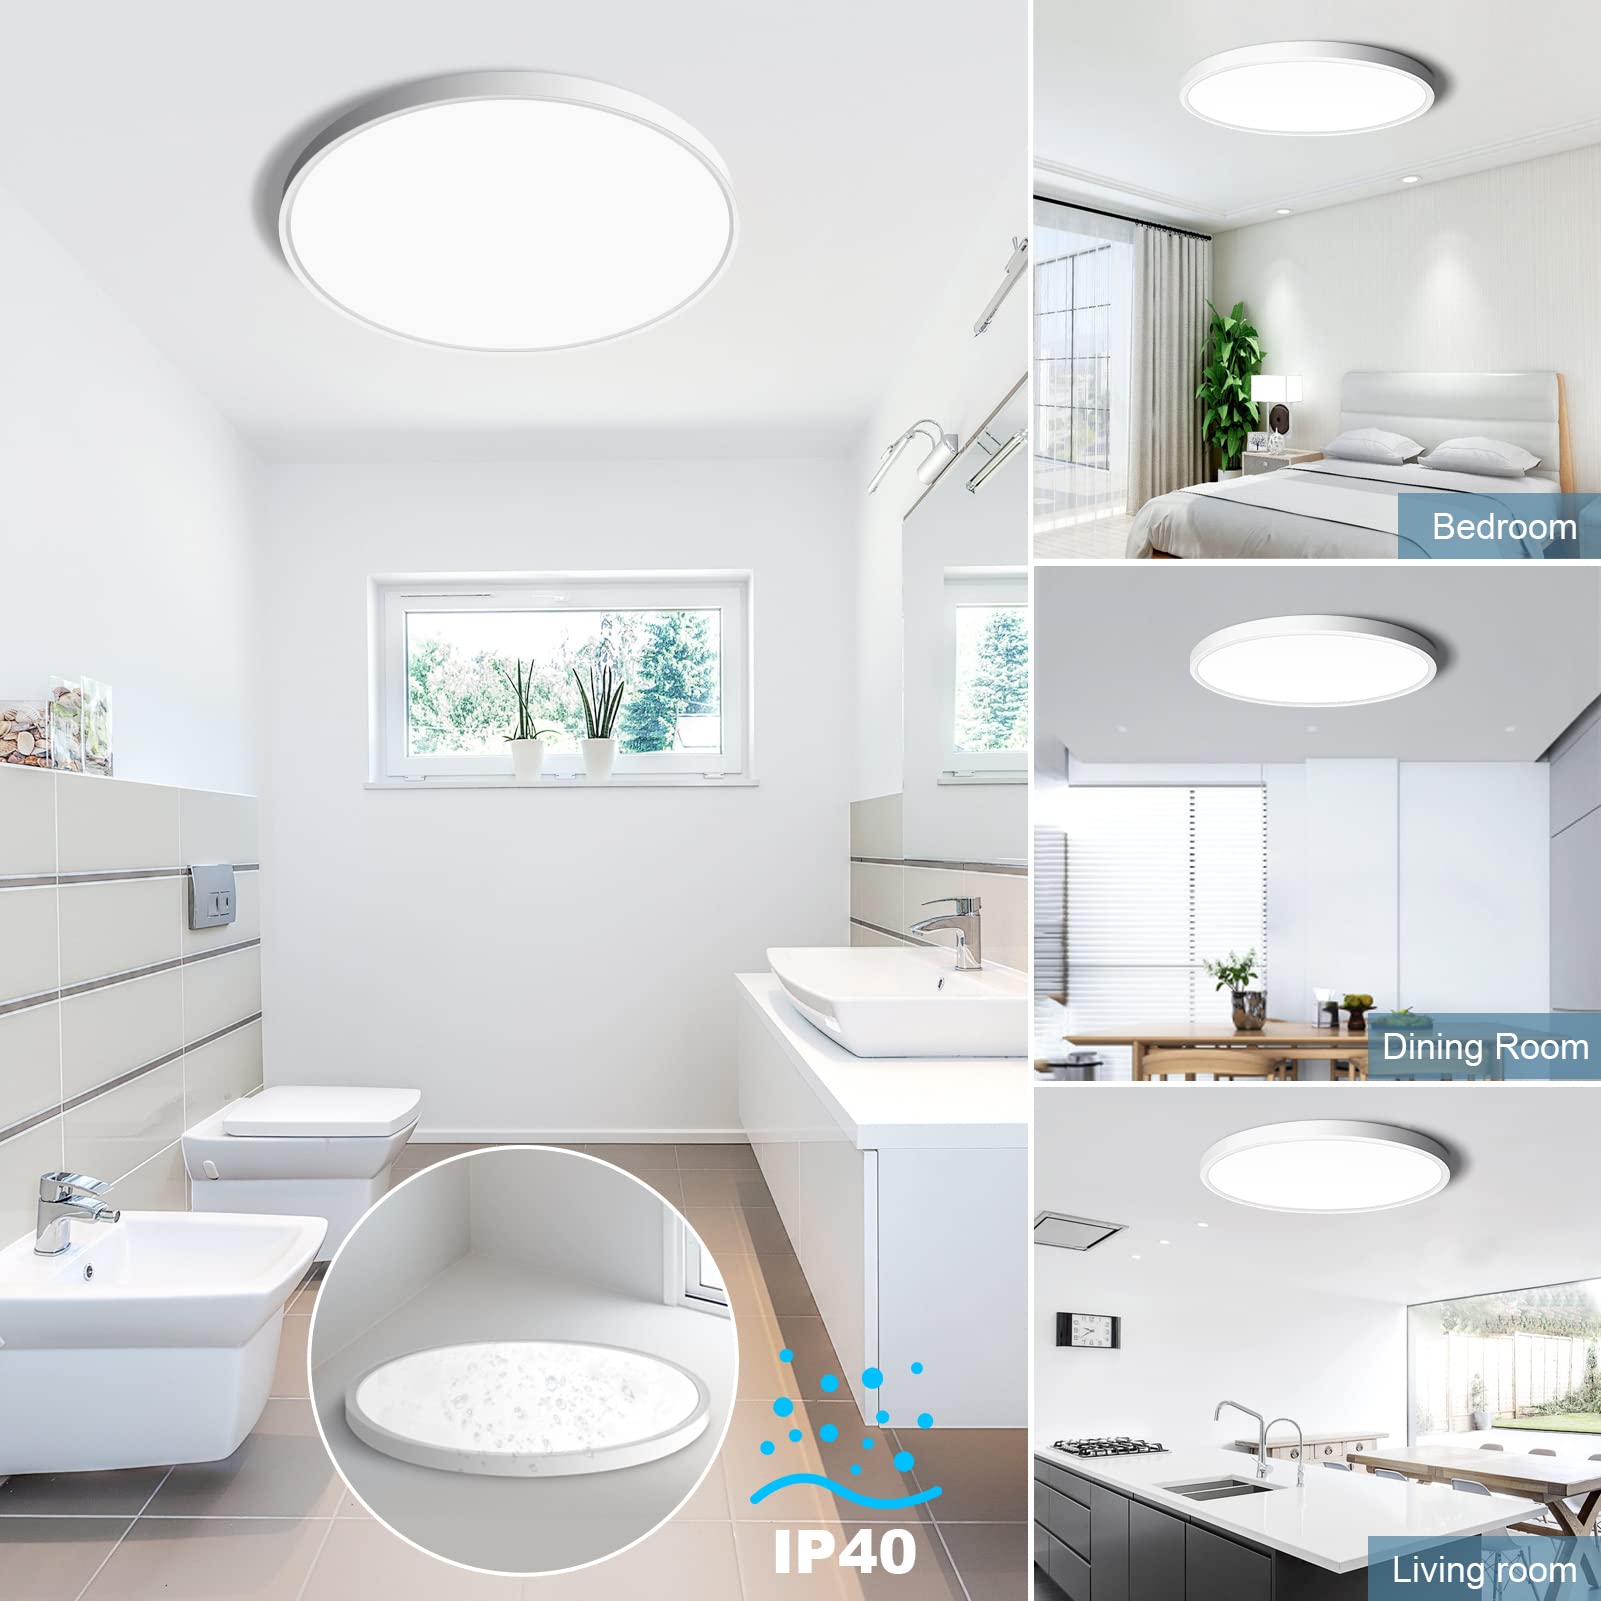 12 Inch LED Flush Mount Ceiling Light Fixture, 5000K Daylight White, 3200LM, 24W, Flat Modern Round Lighting Fixture, 240W Equivalent White Ceiling Lamp for Kitchens, Stairwells, Bedrooms.etc.